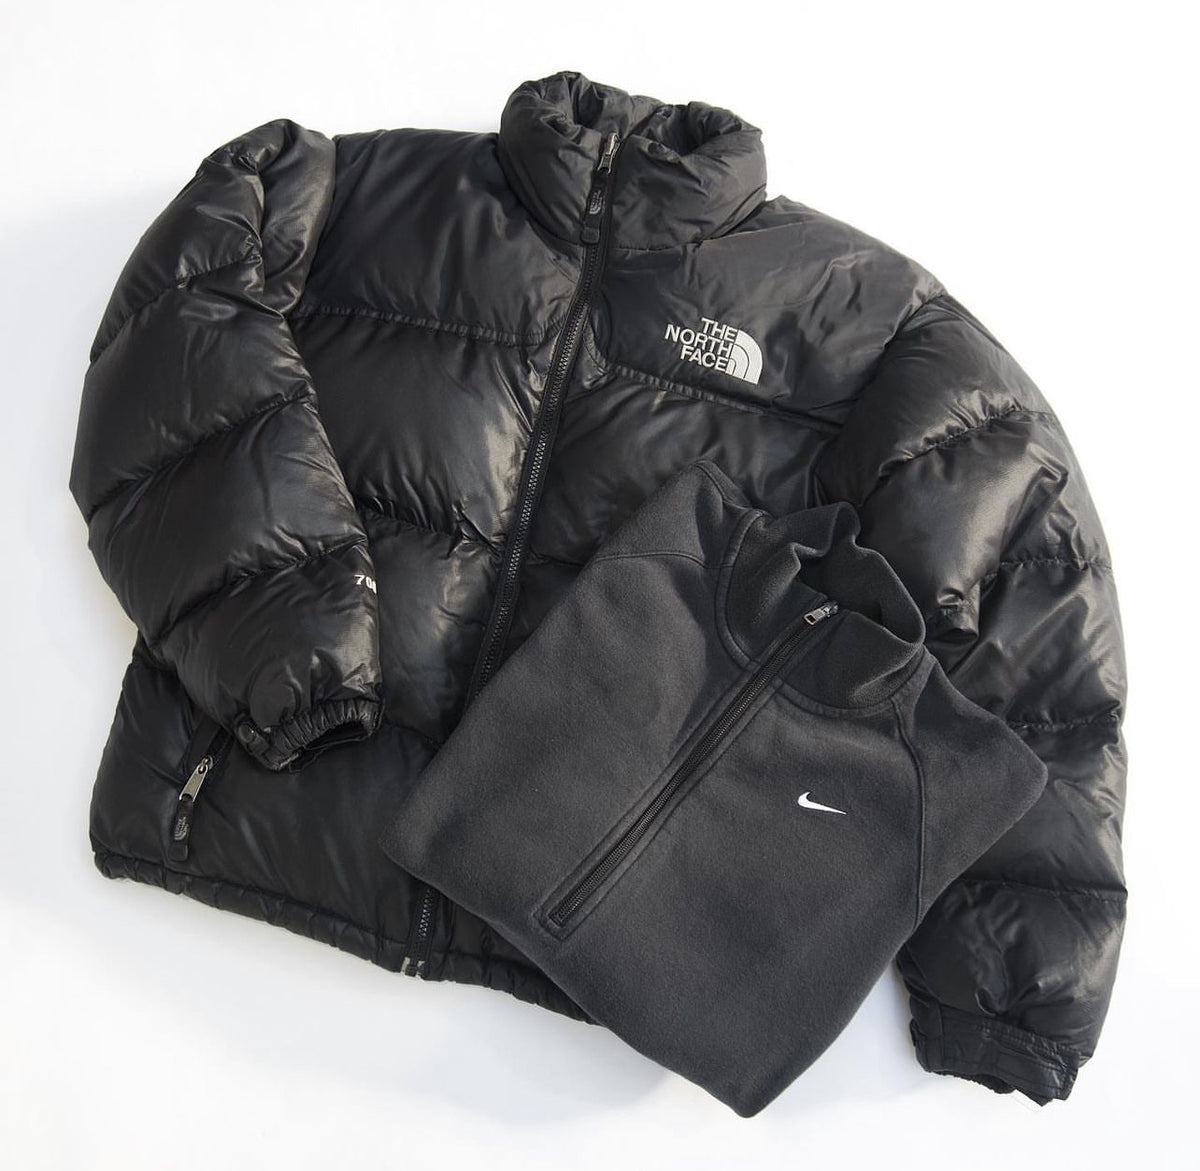 The North Face & Columbia Bale